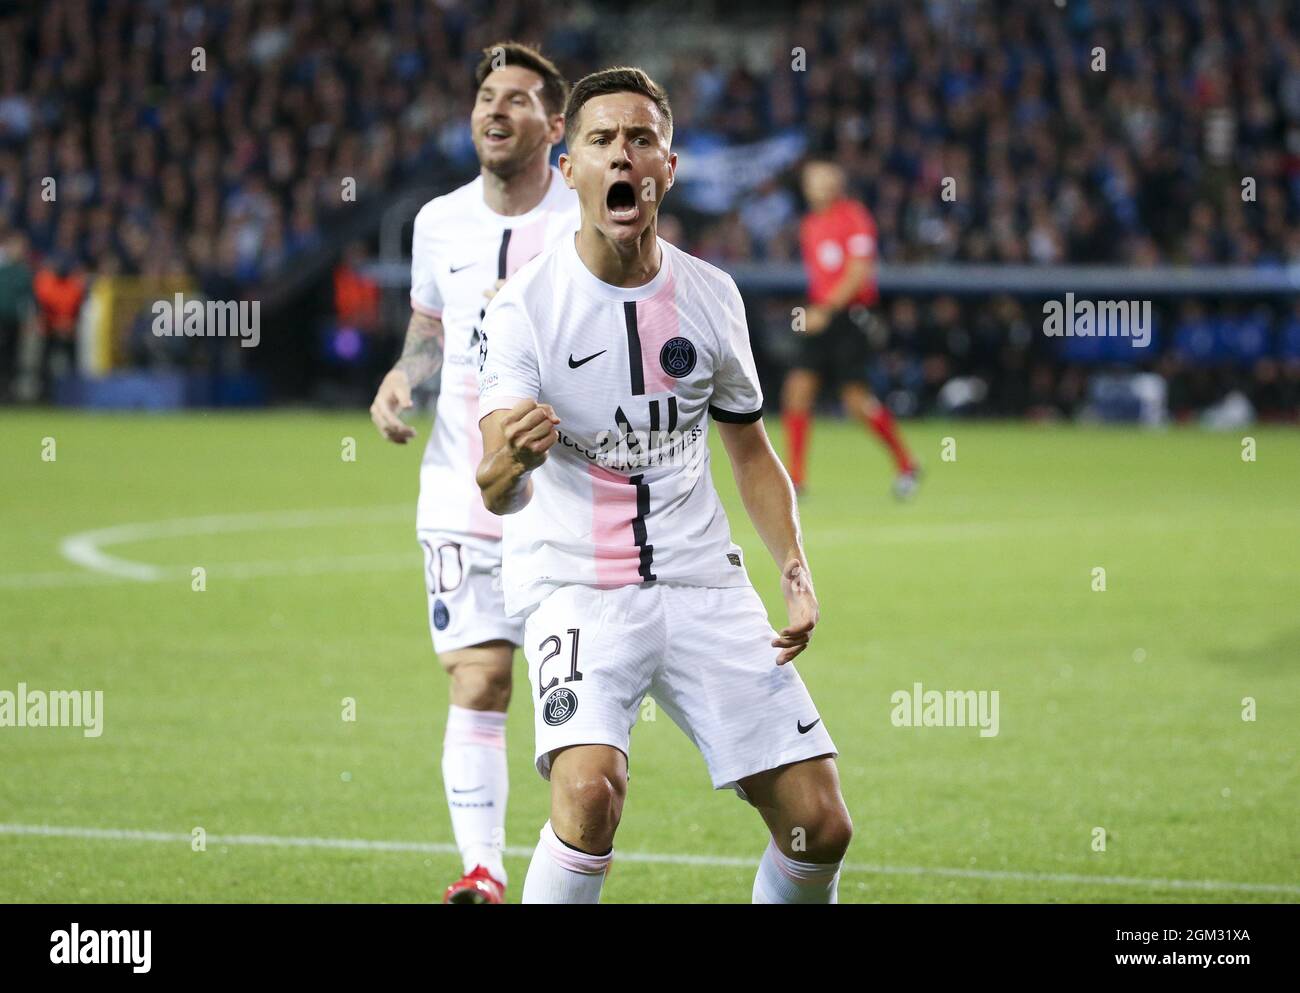 PSG midfielder Ander Herrera doubts how the club can sign Lionel